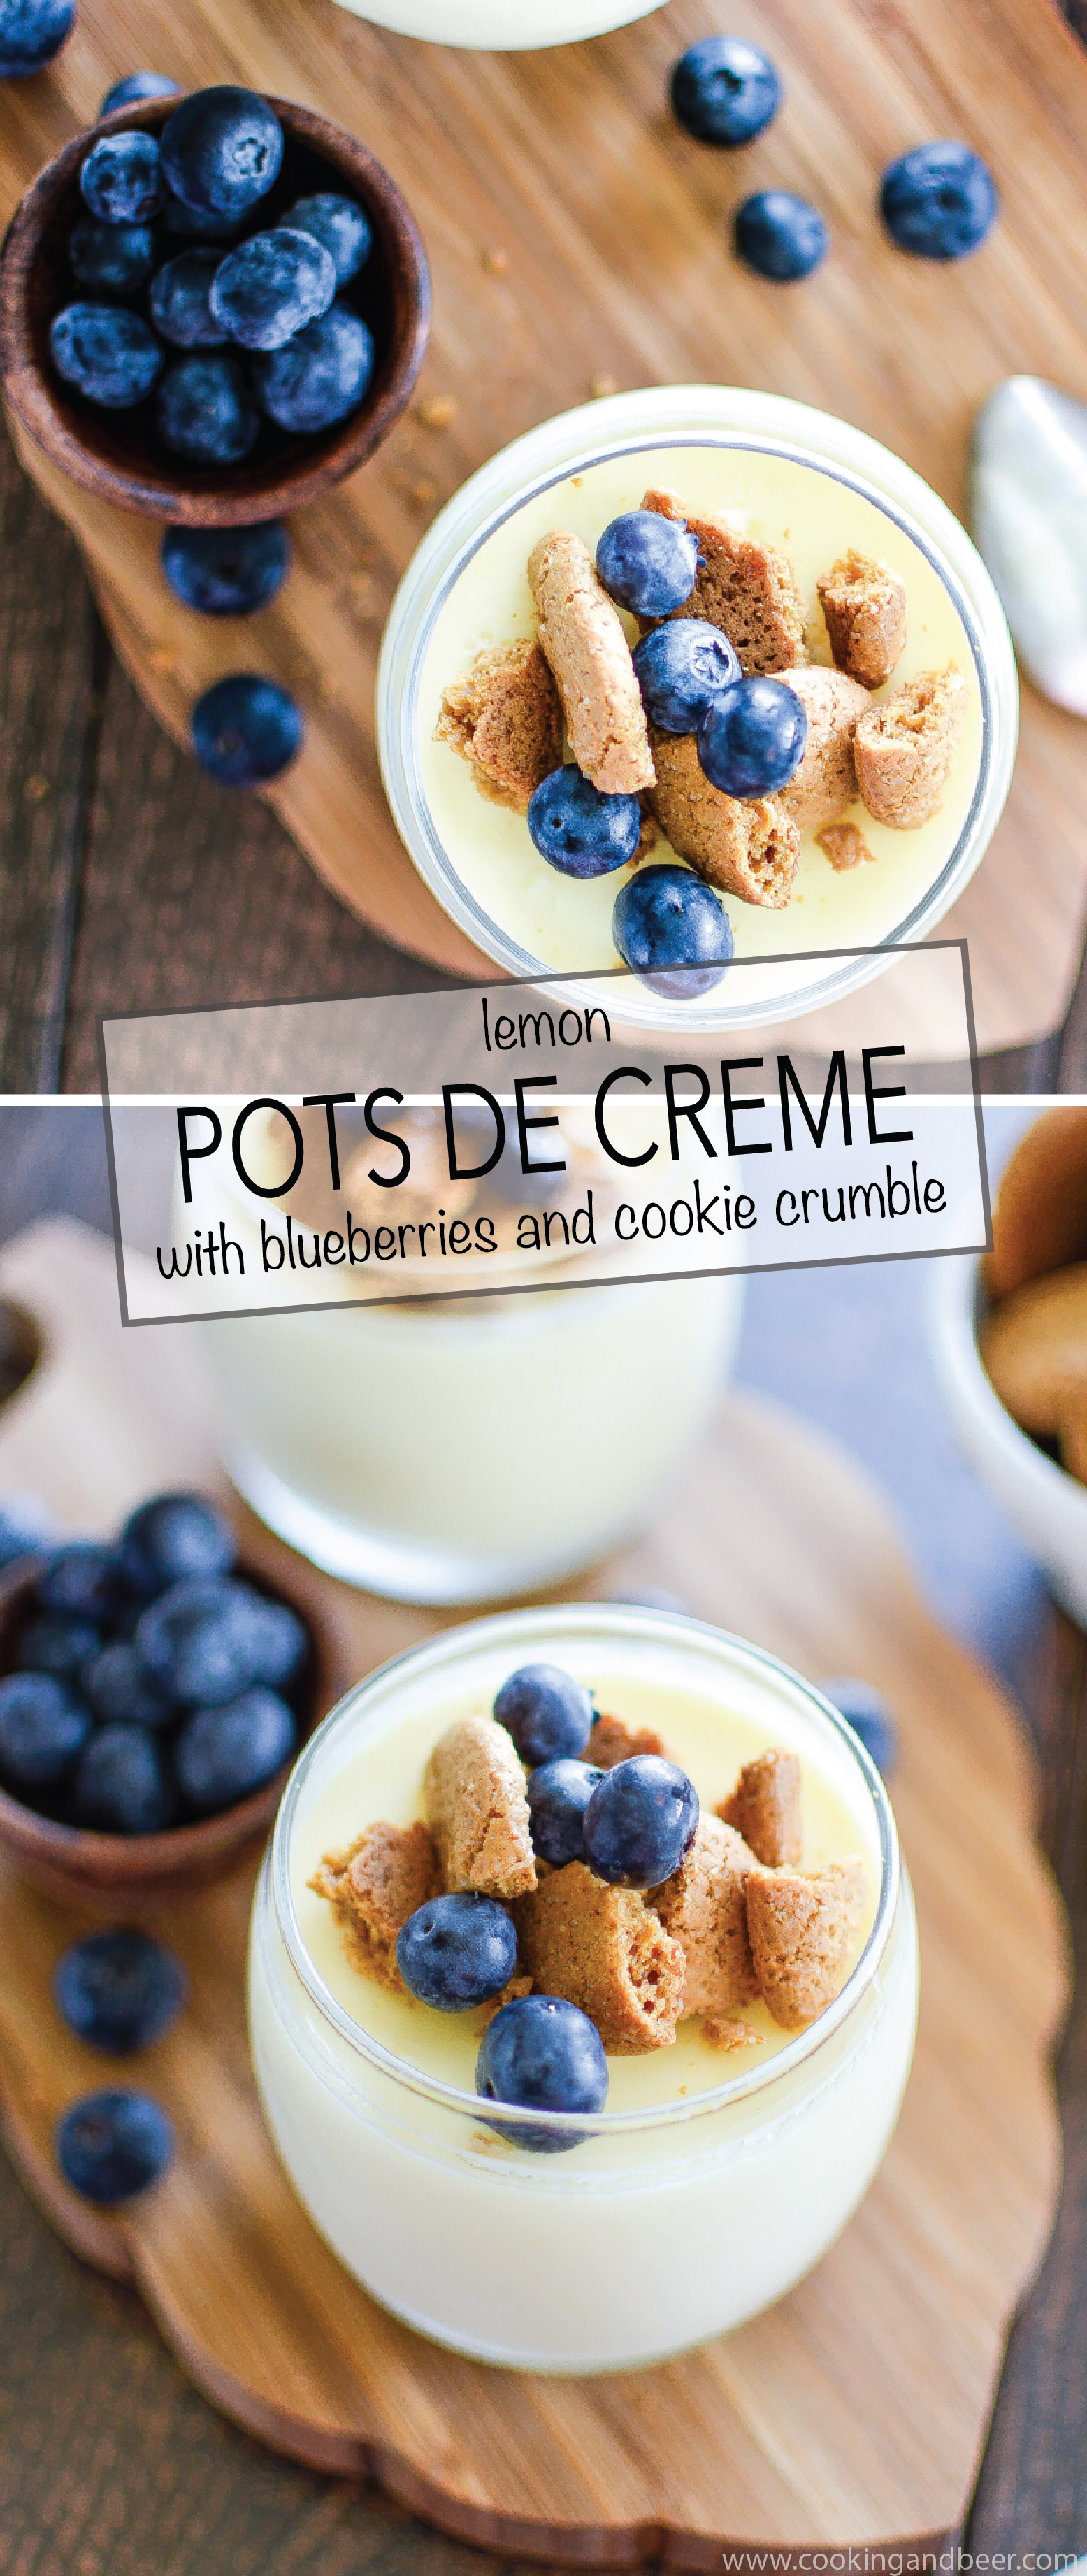 Lemon Pots de Creme with Blueberries and Cookie Crumble: a light and refreshing dessert recipe to serve this summer! | www.cookingandbeer.com